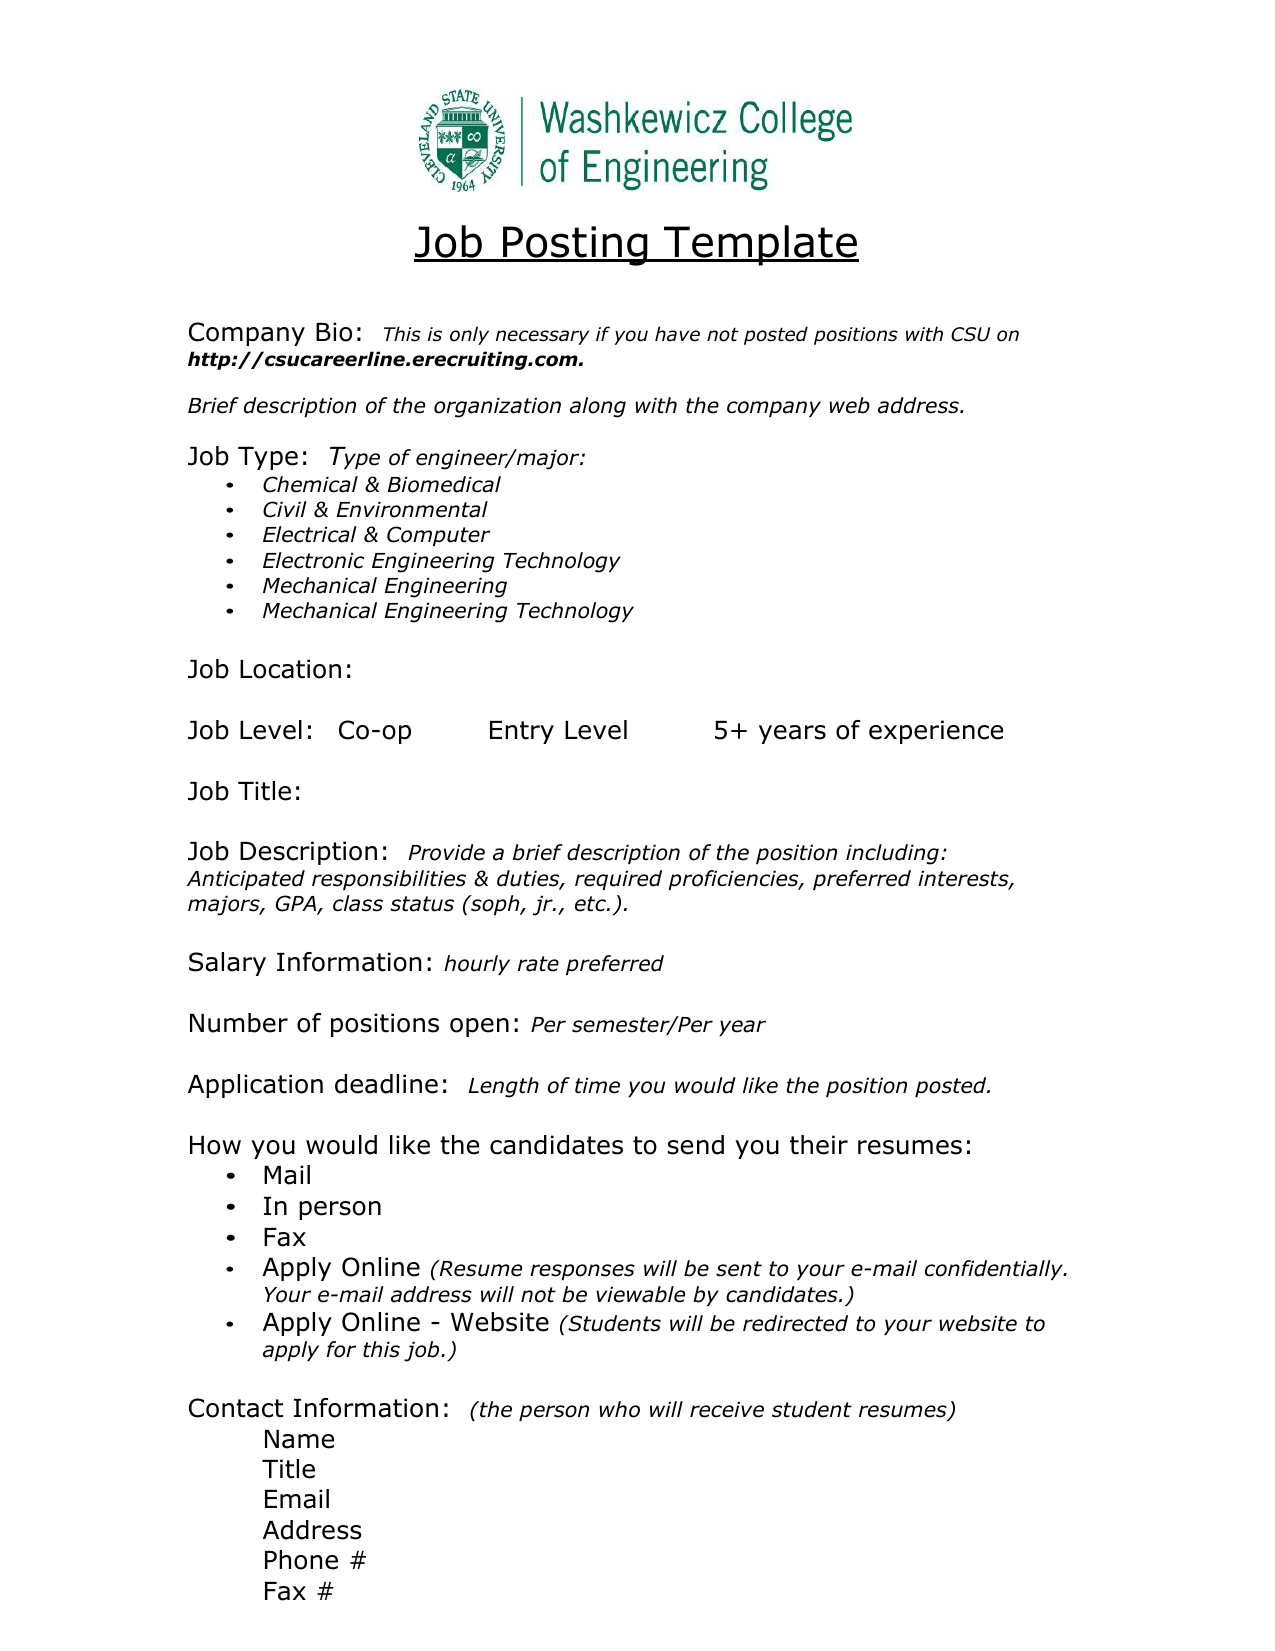 How To Write A Job Posting Template